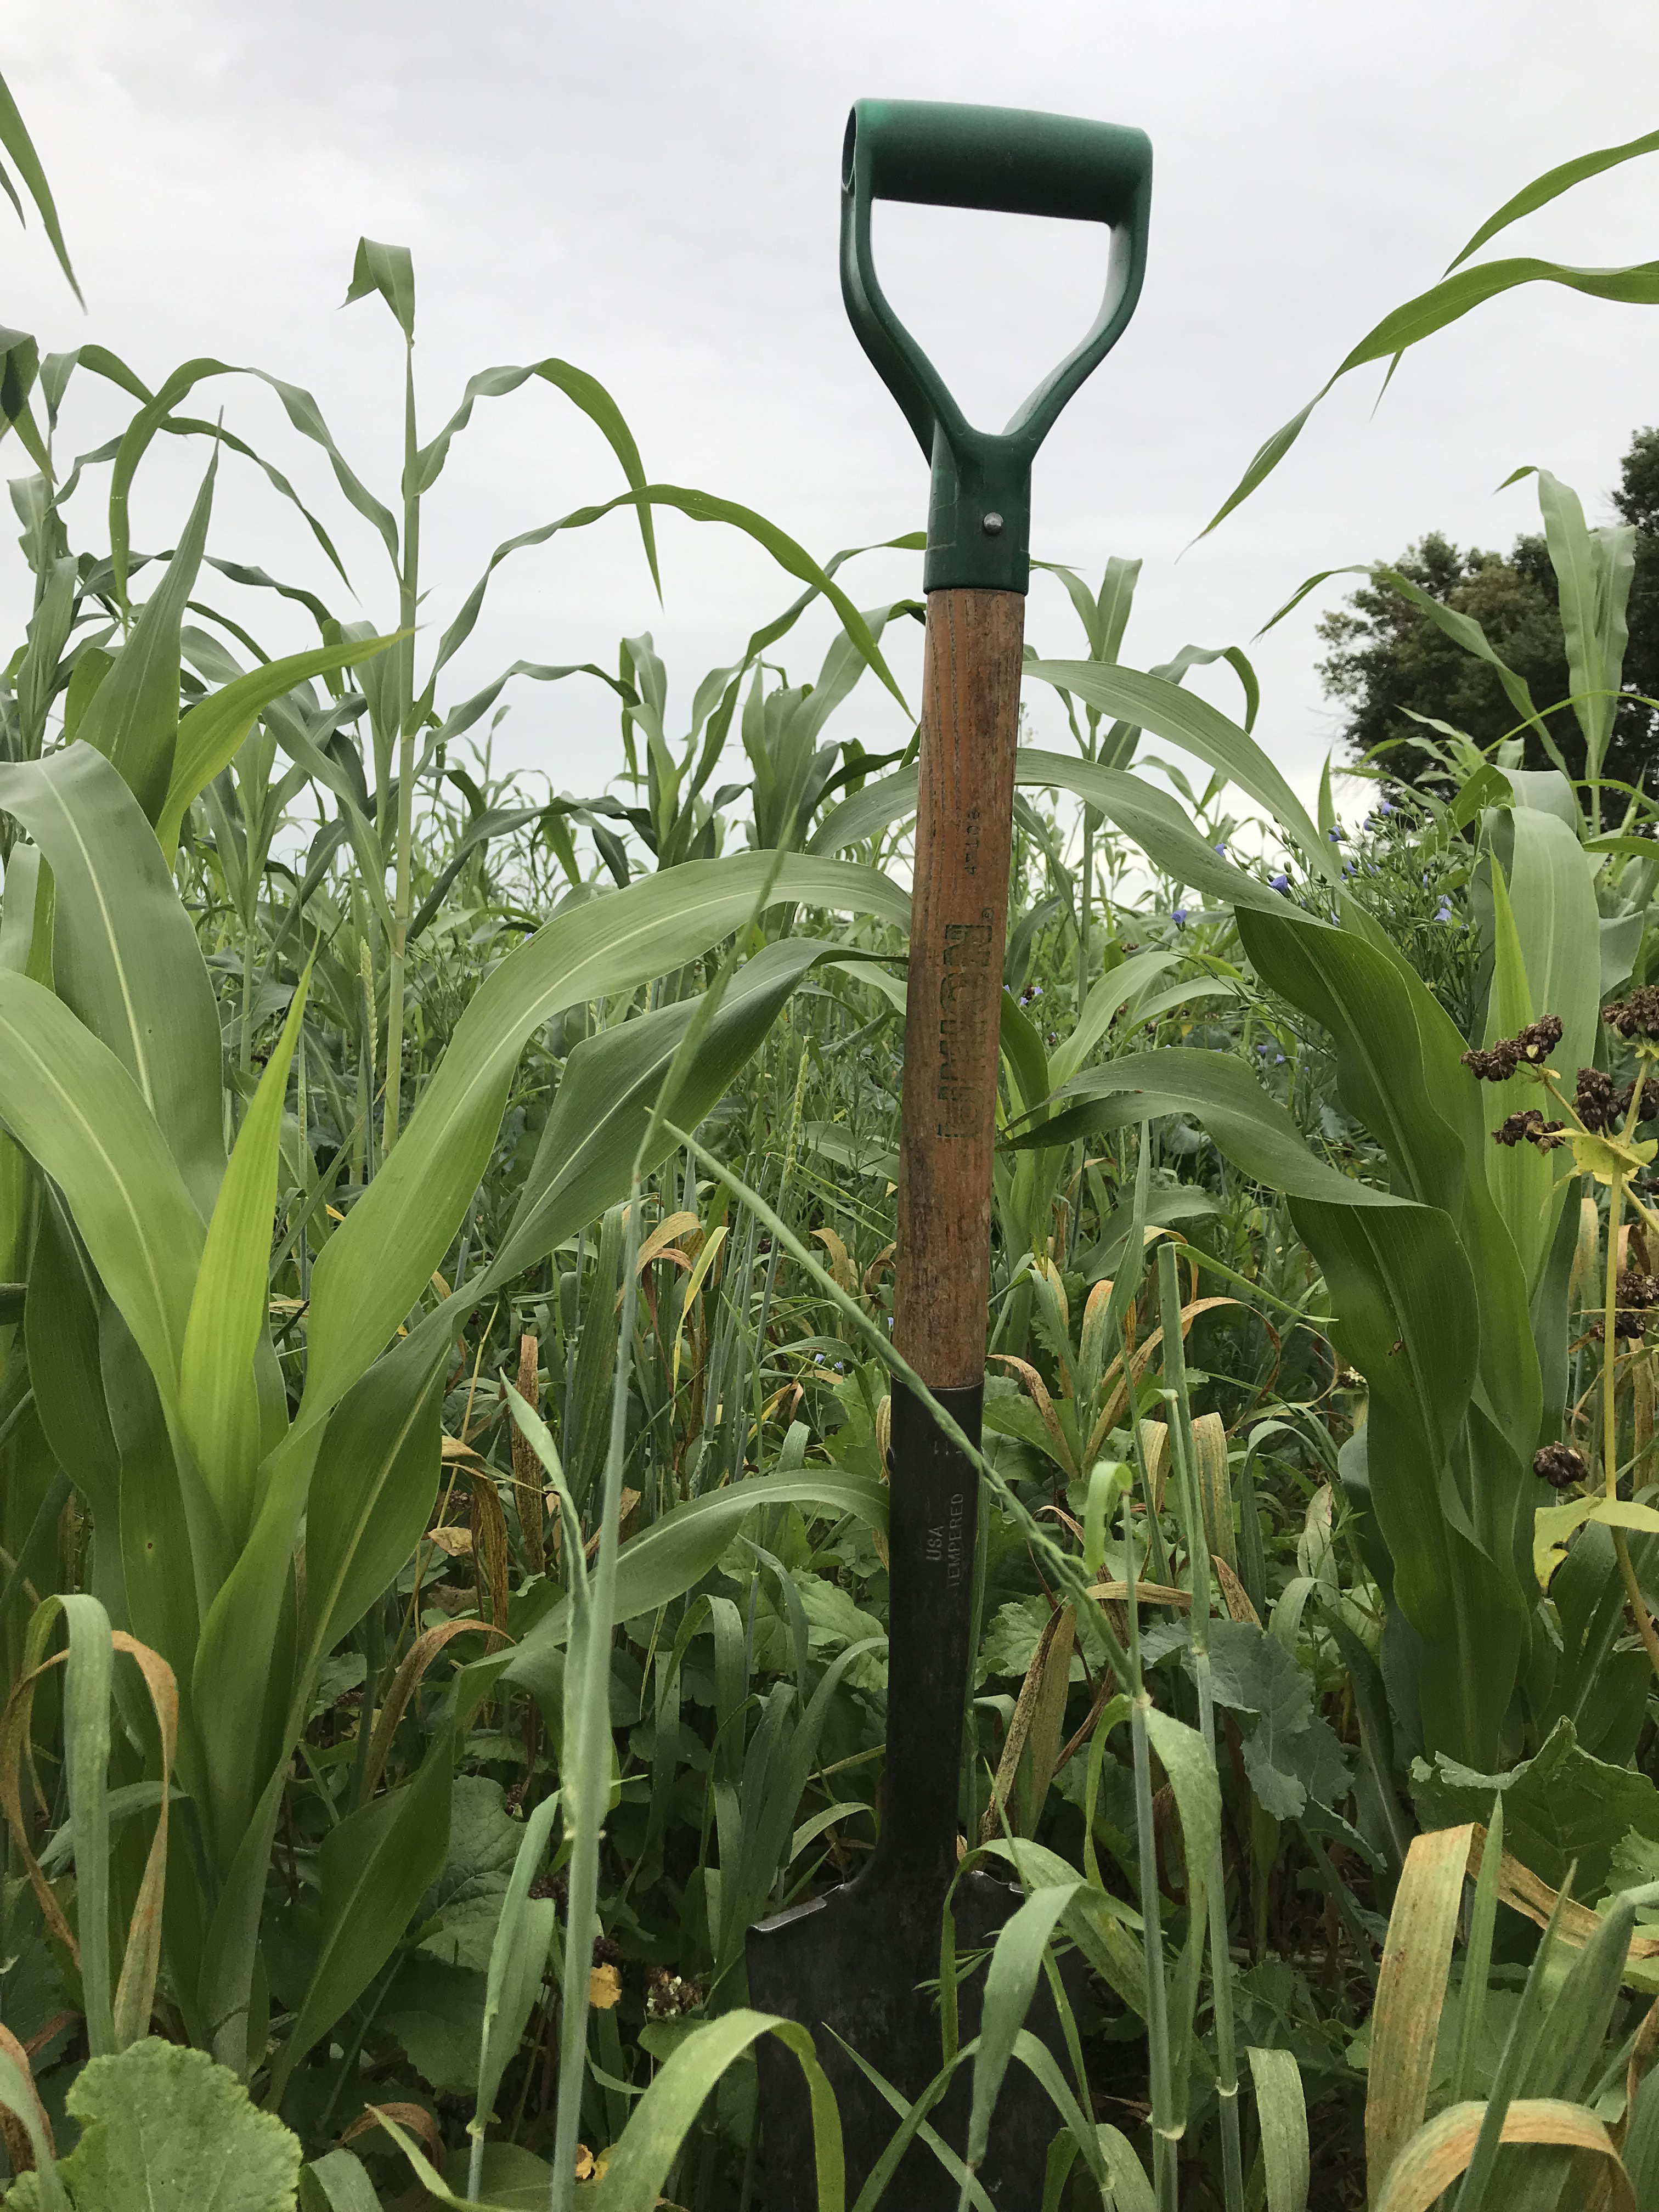 A spade stands upright in a corn field with tall, green corn stalks around it